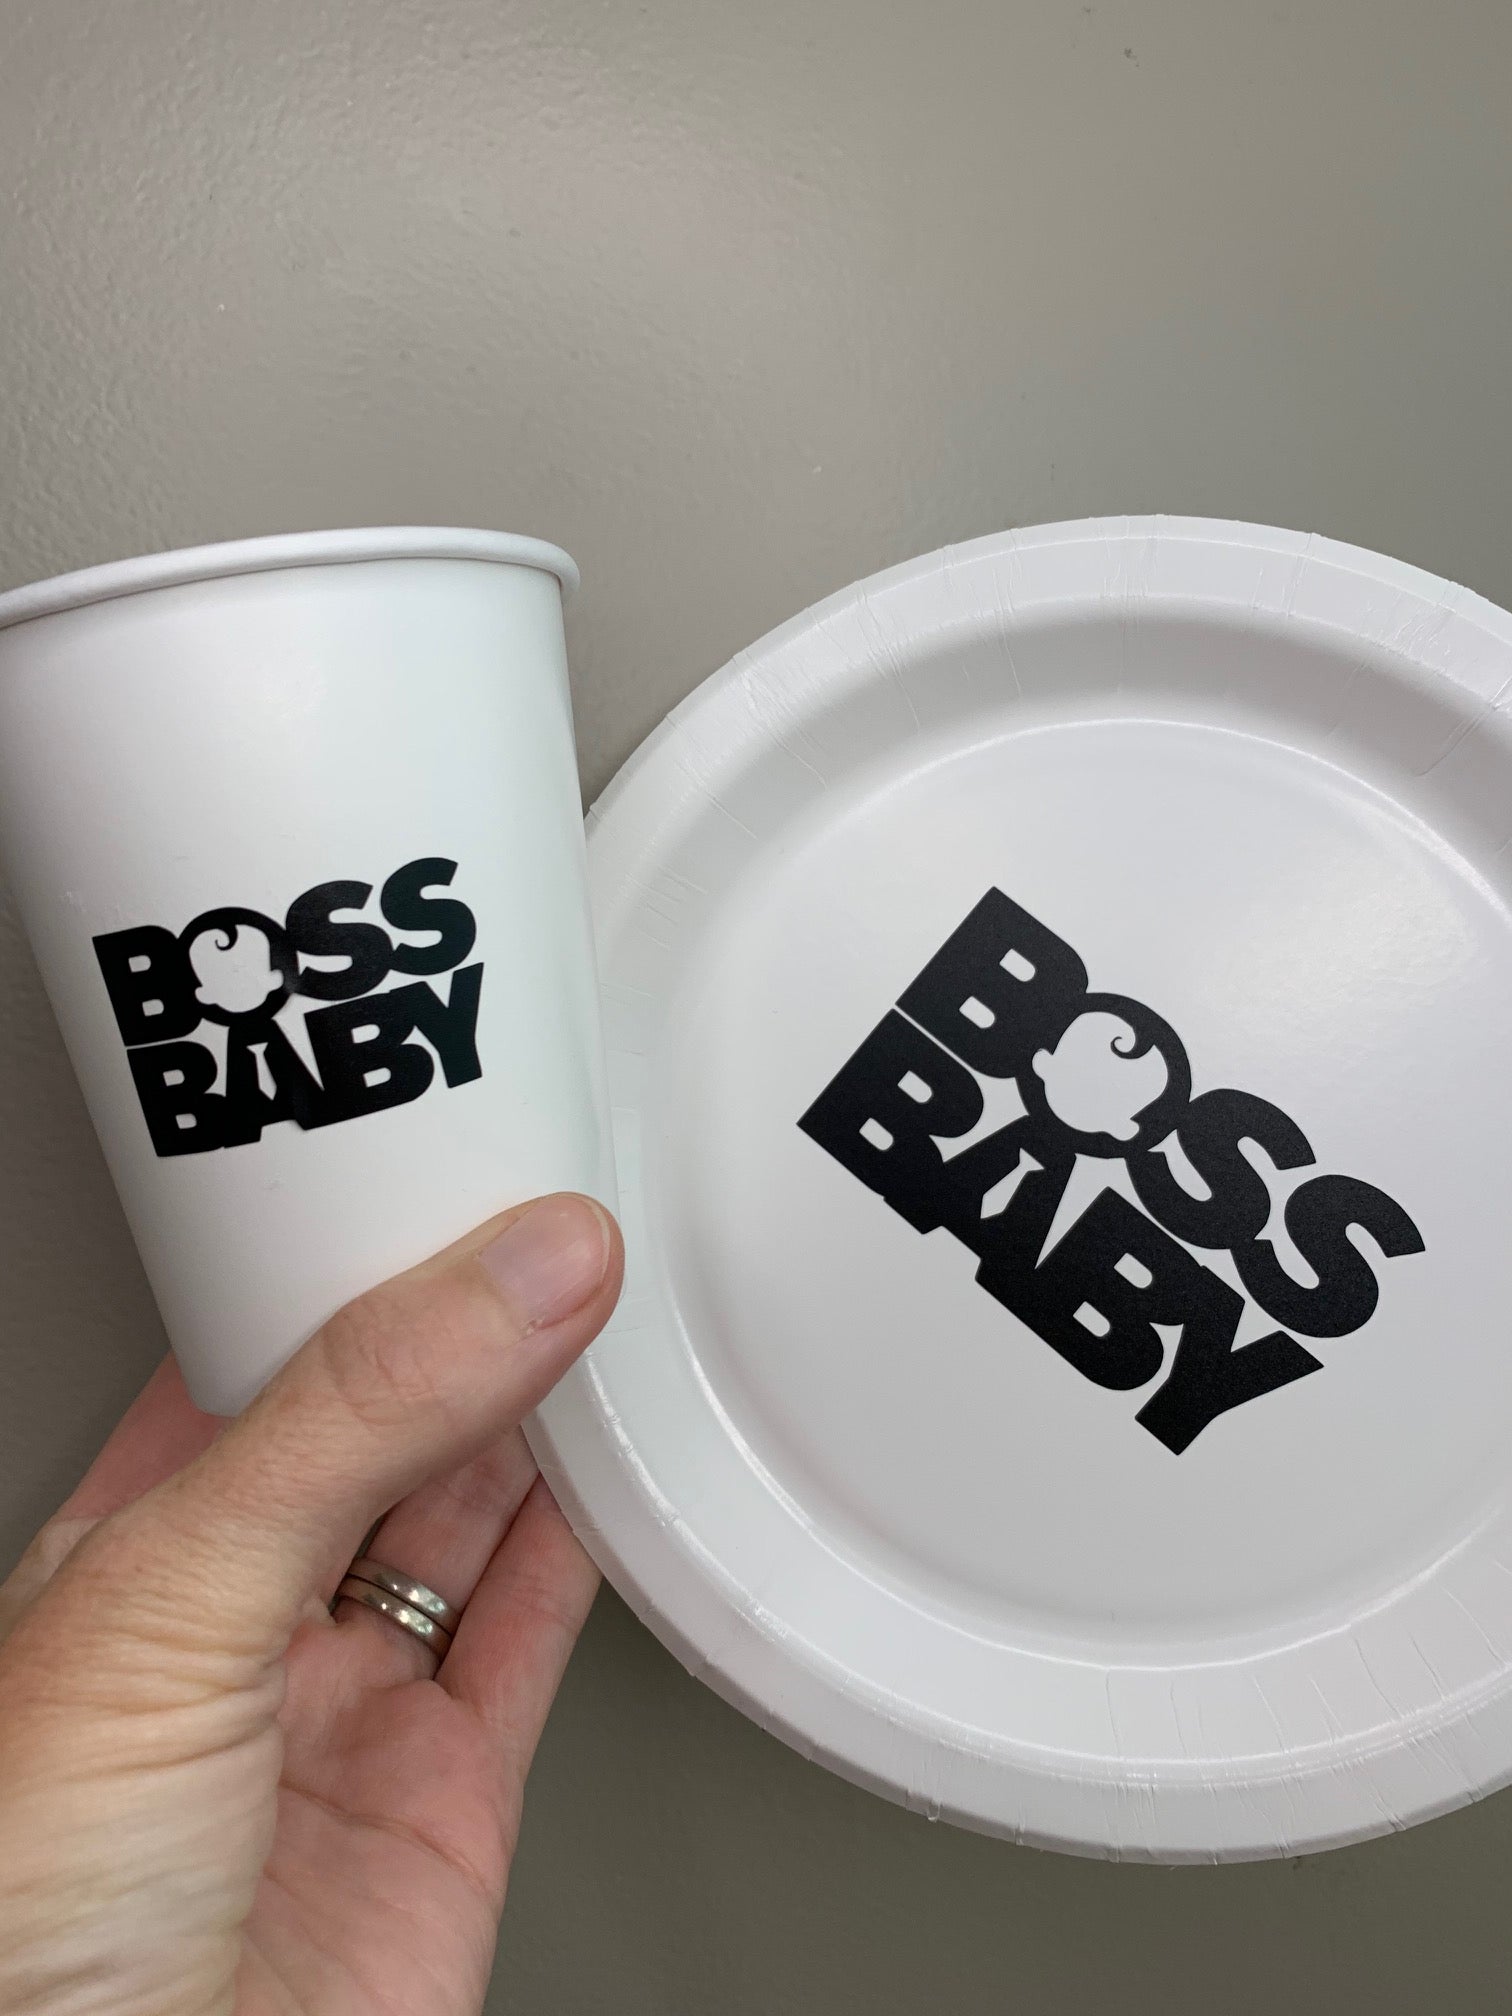 Boss Baby party plates and cups